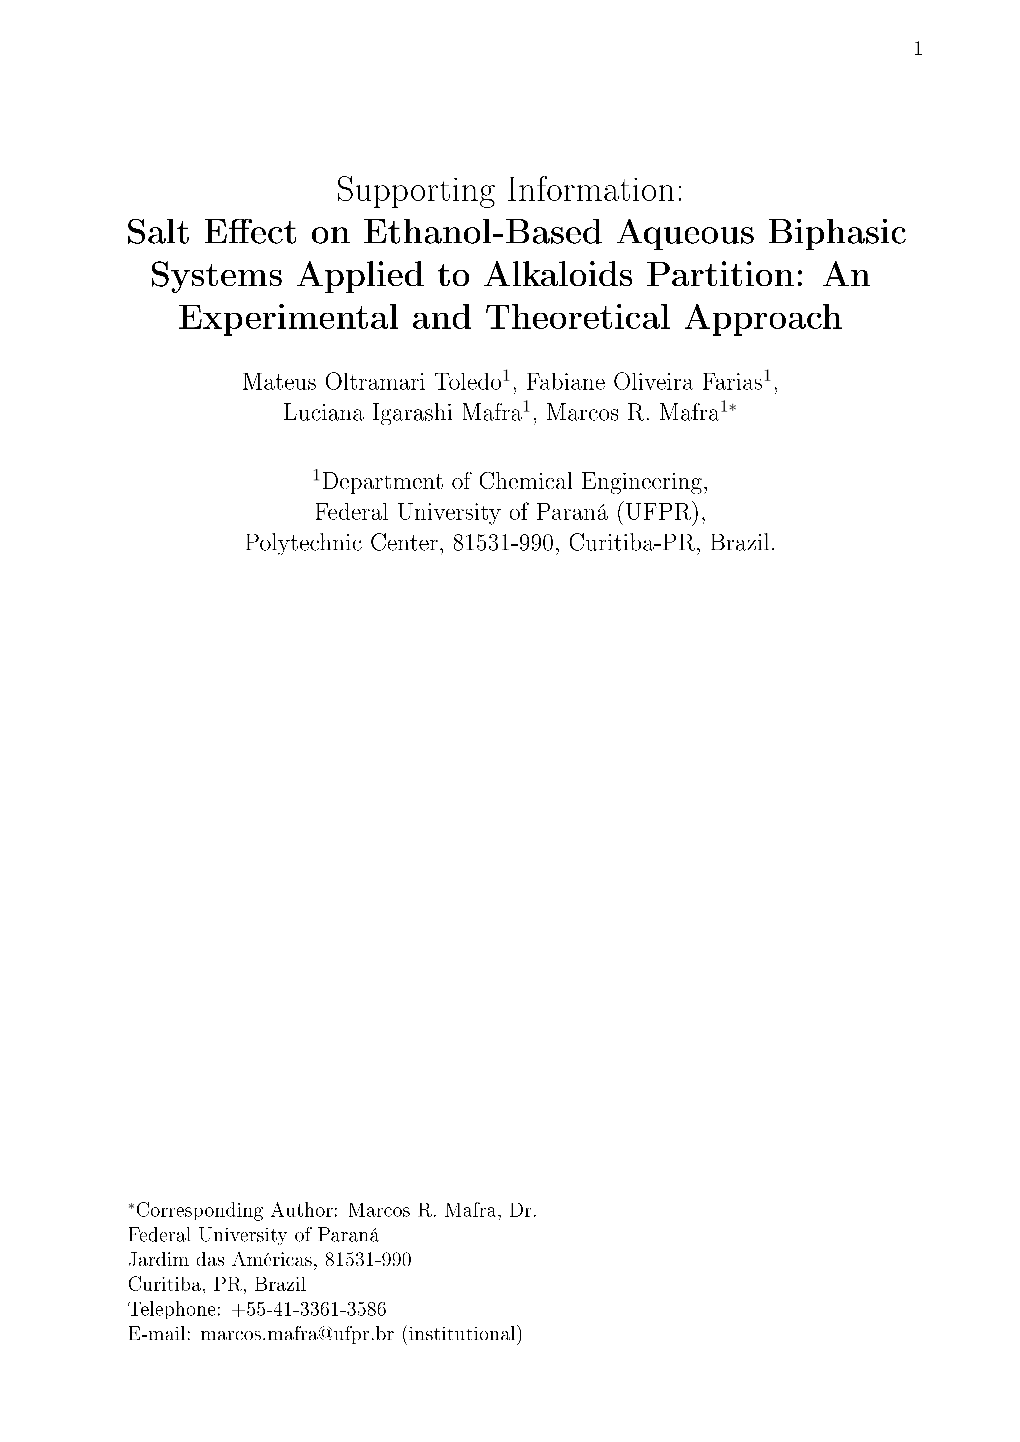 Salt E Ect on Ethanol-Based Aqueous Biphasic Systems Applied To